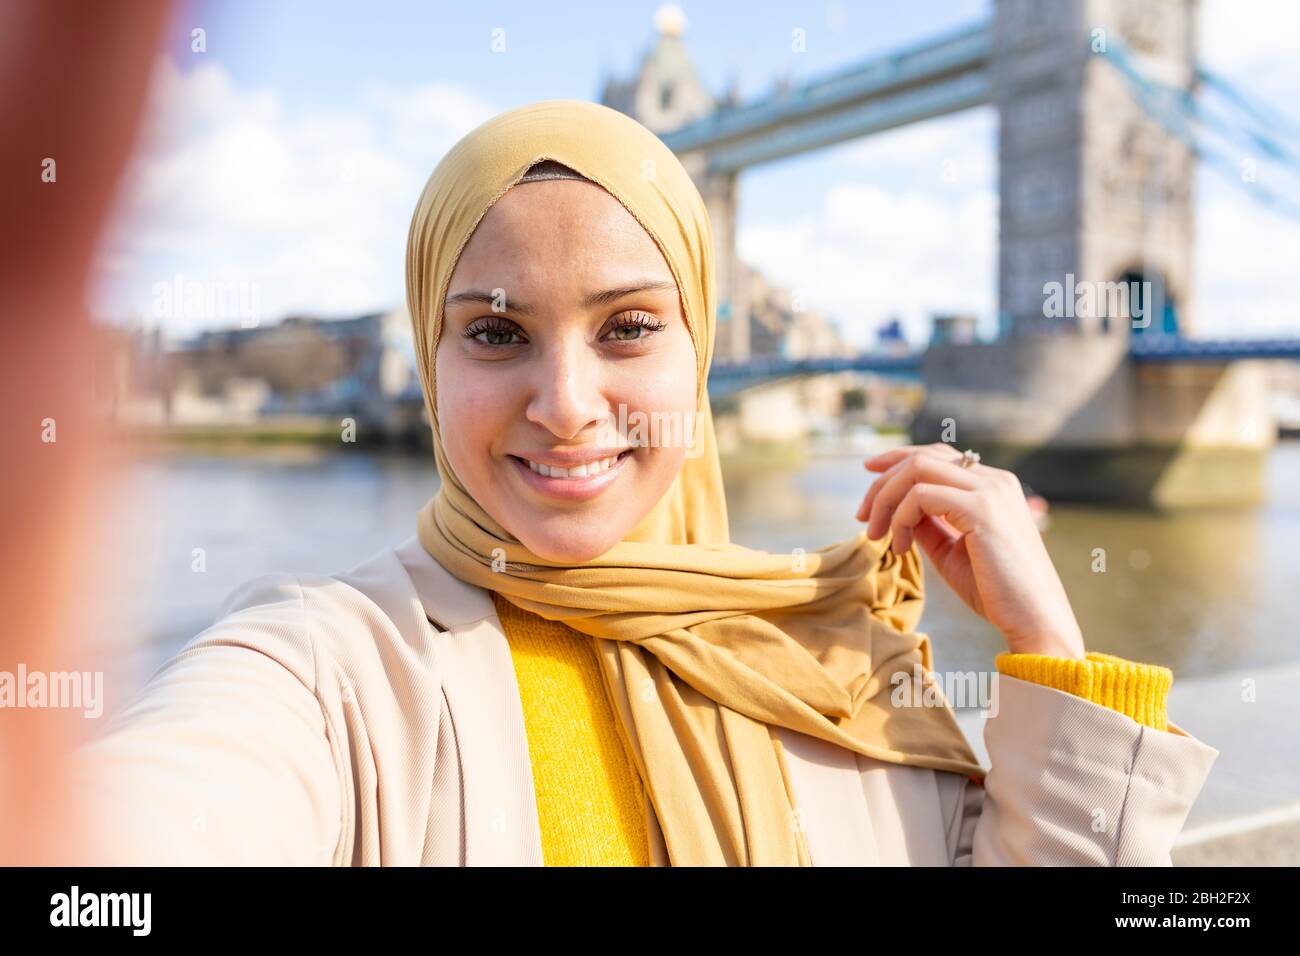 Portrait of smiling young woman taking selfie in front of Tower Bridge, London, UK Stock Photo